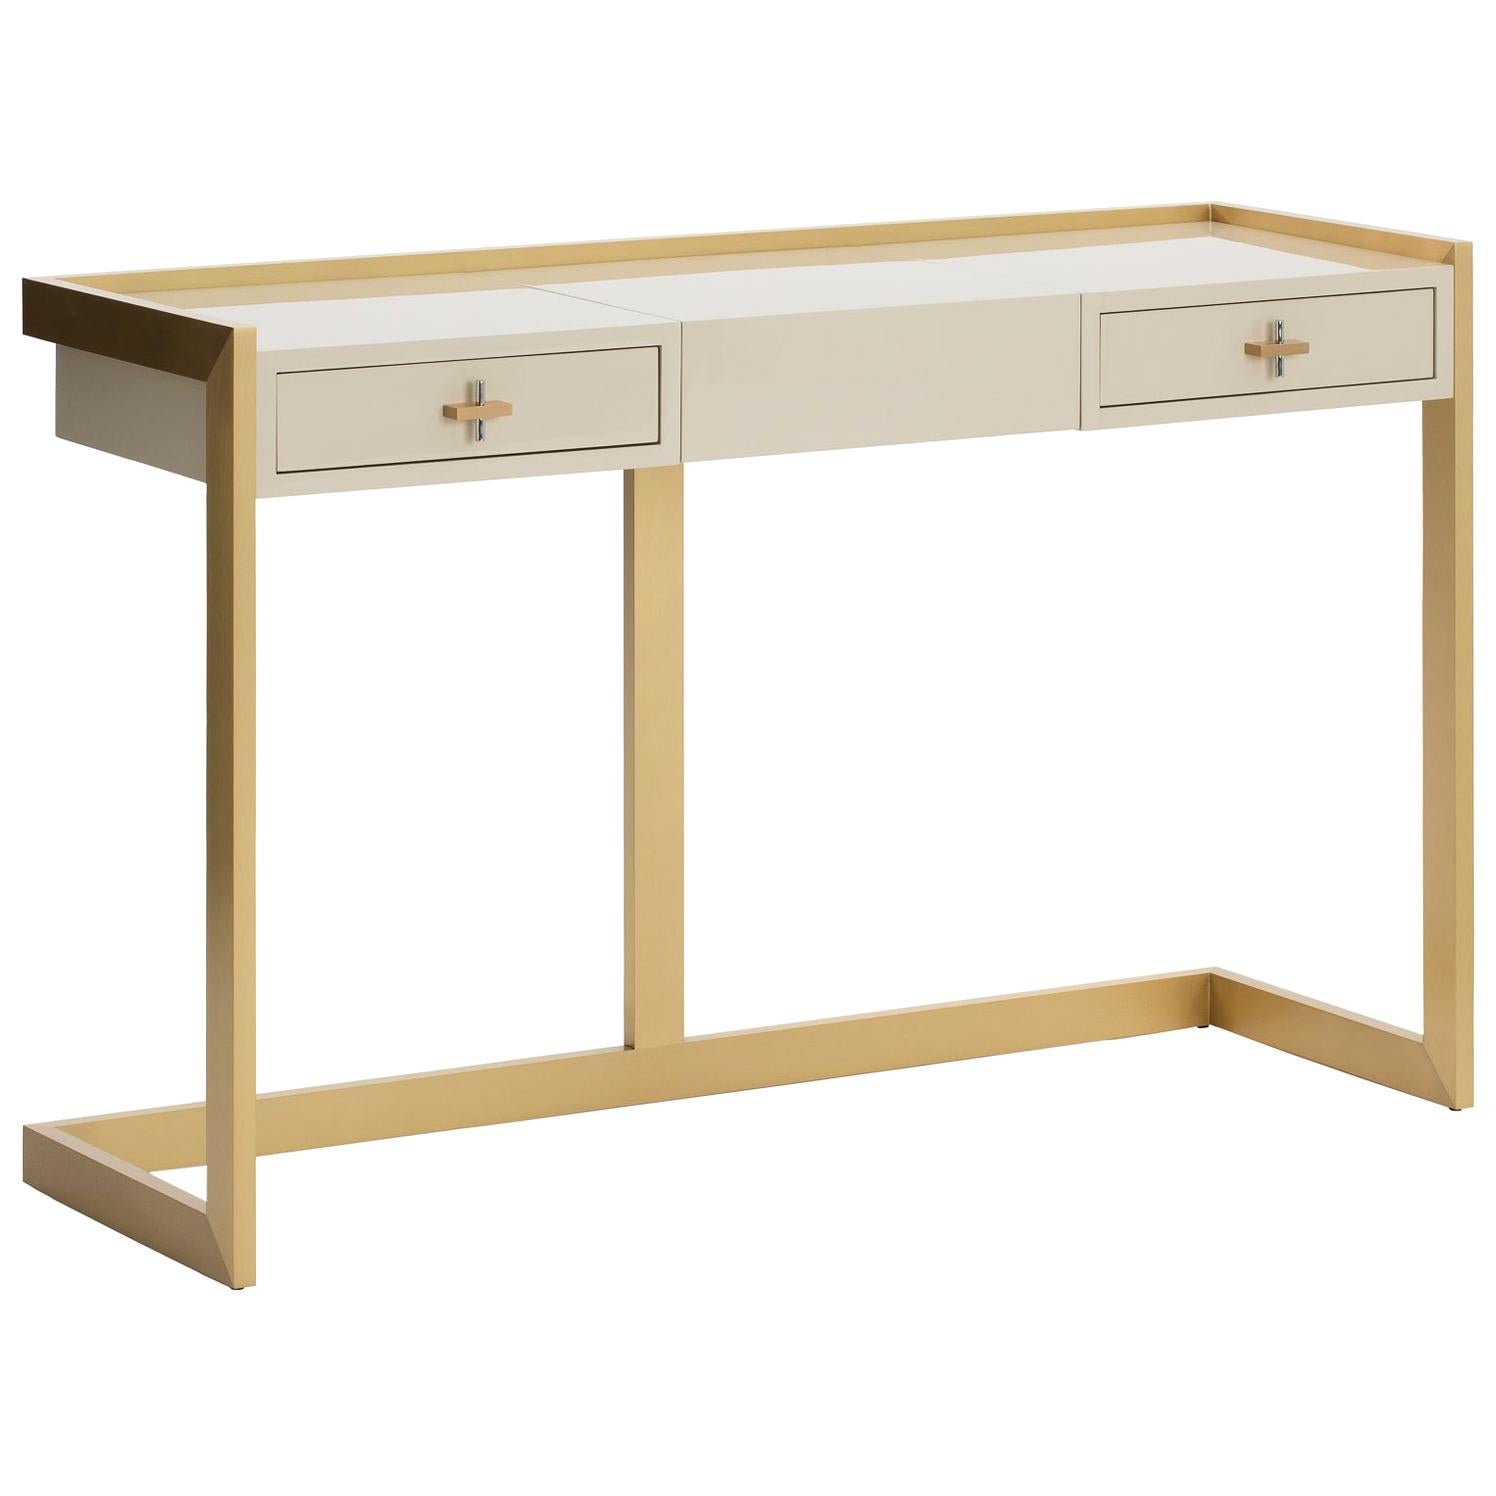 QUIMERA Dressing Table with Brushed Brass Structure and Handles